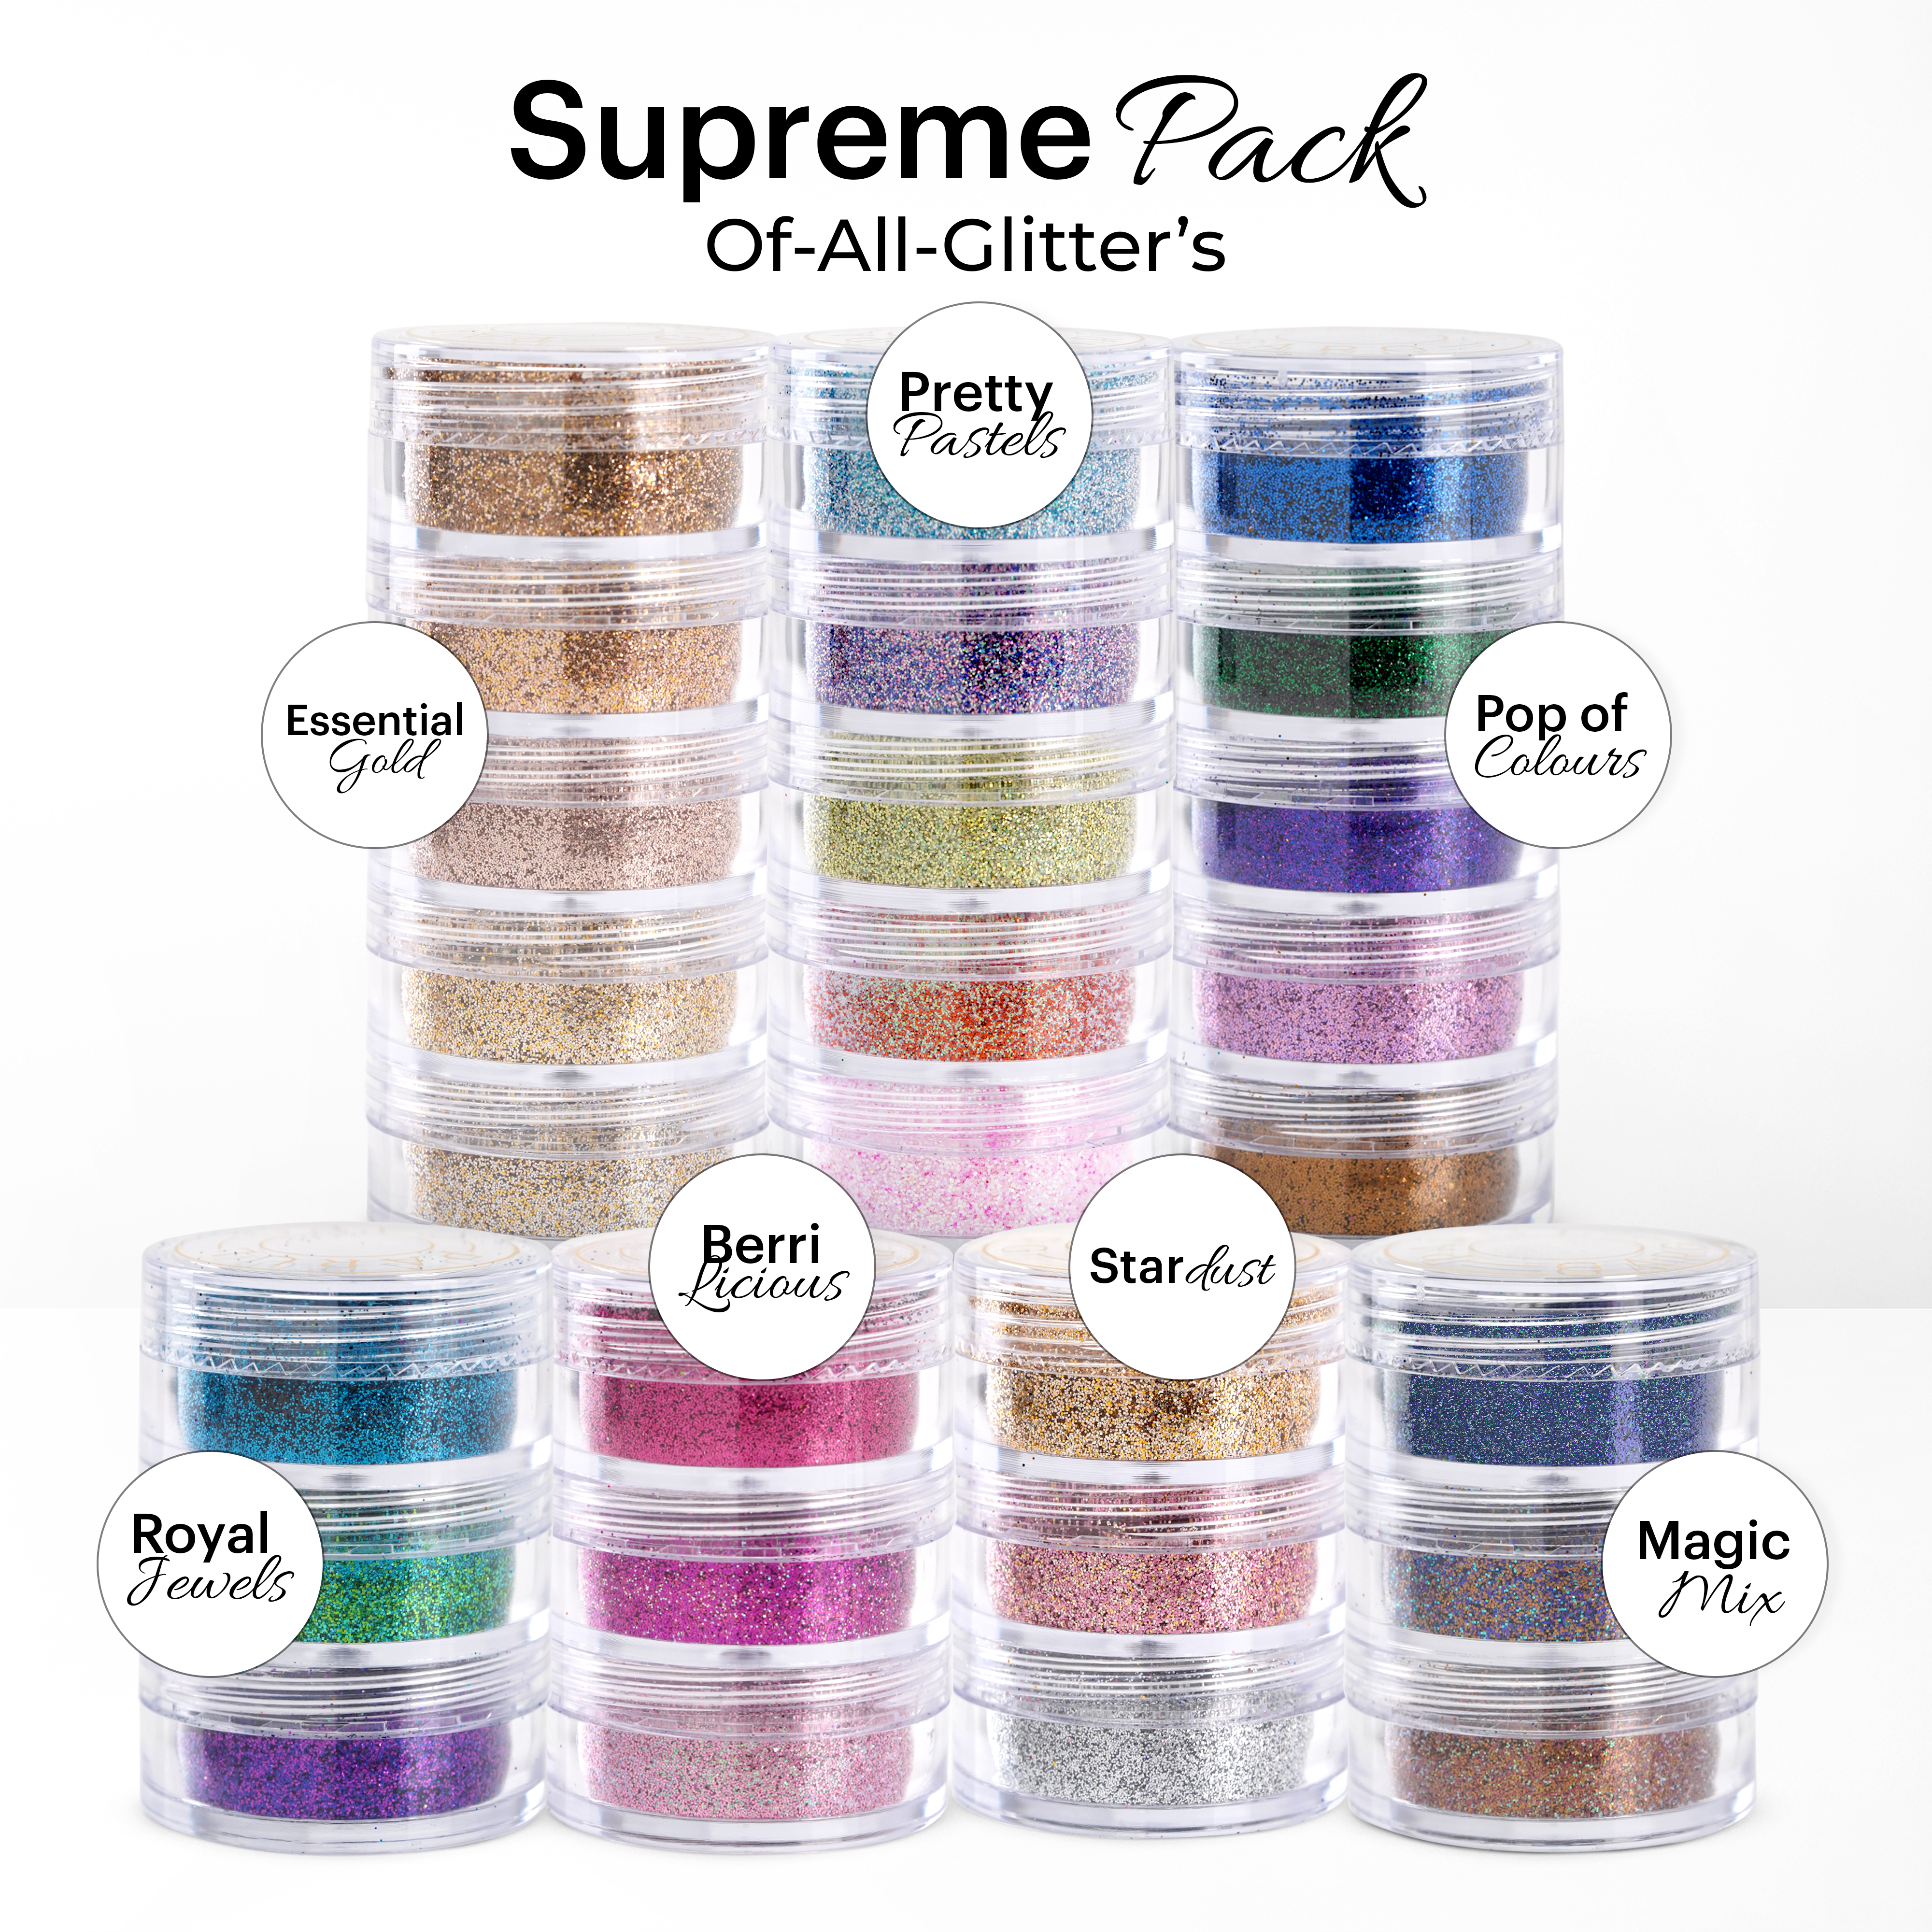 Supreme Pack of All Glitters